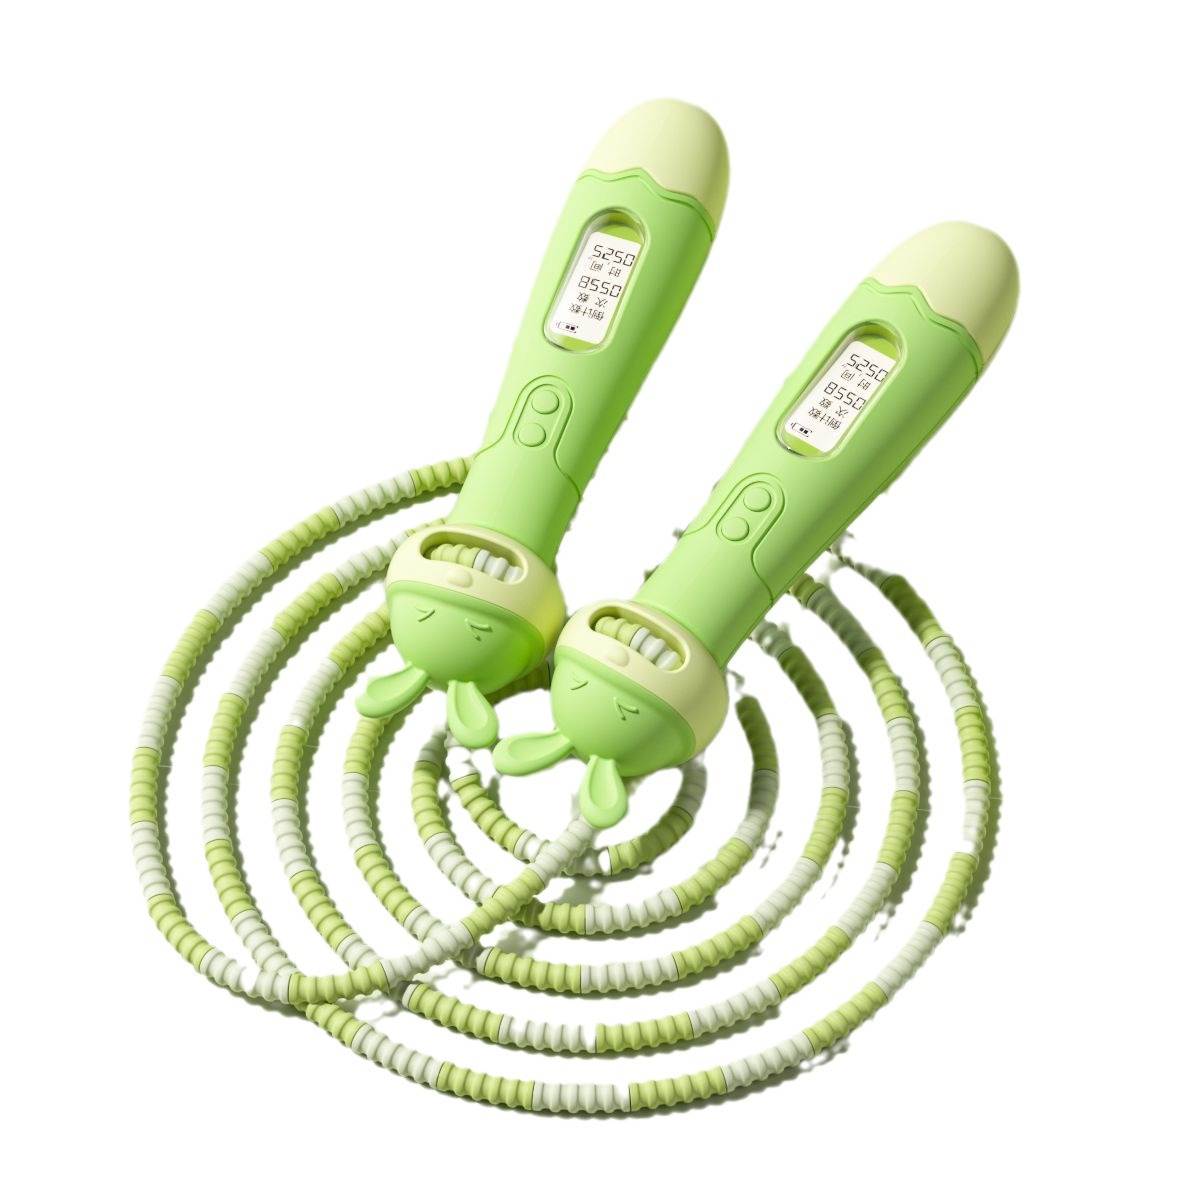 Children's Counting Bamboo Skipping Rope Cartoon Soft Bead Adjustable Sports Skipping Rope for Primary School Students for Kindergarten Entry